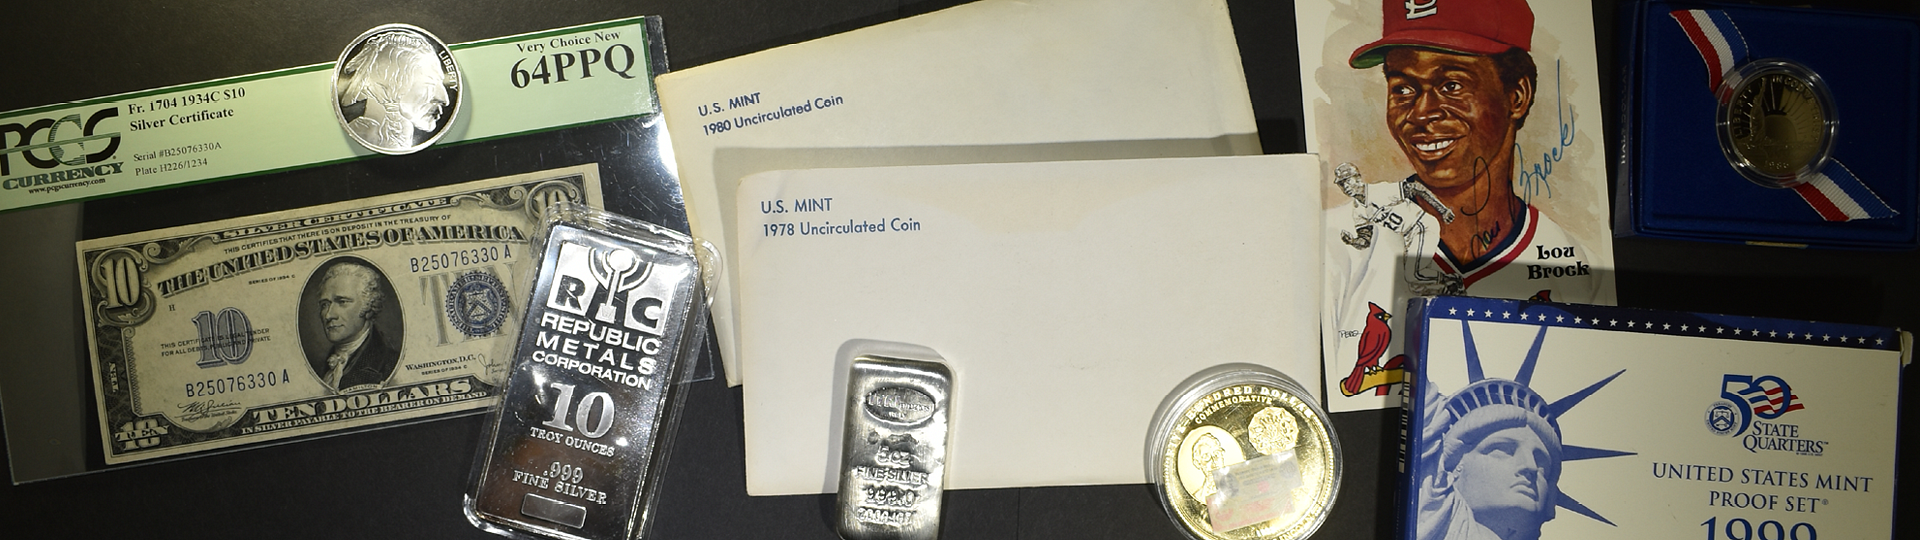 April 4th Silver City Rare Coins & Currency by Silver City Auctions